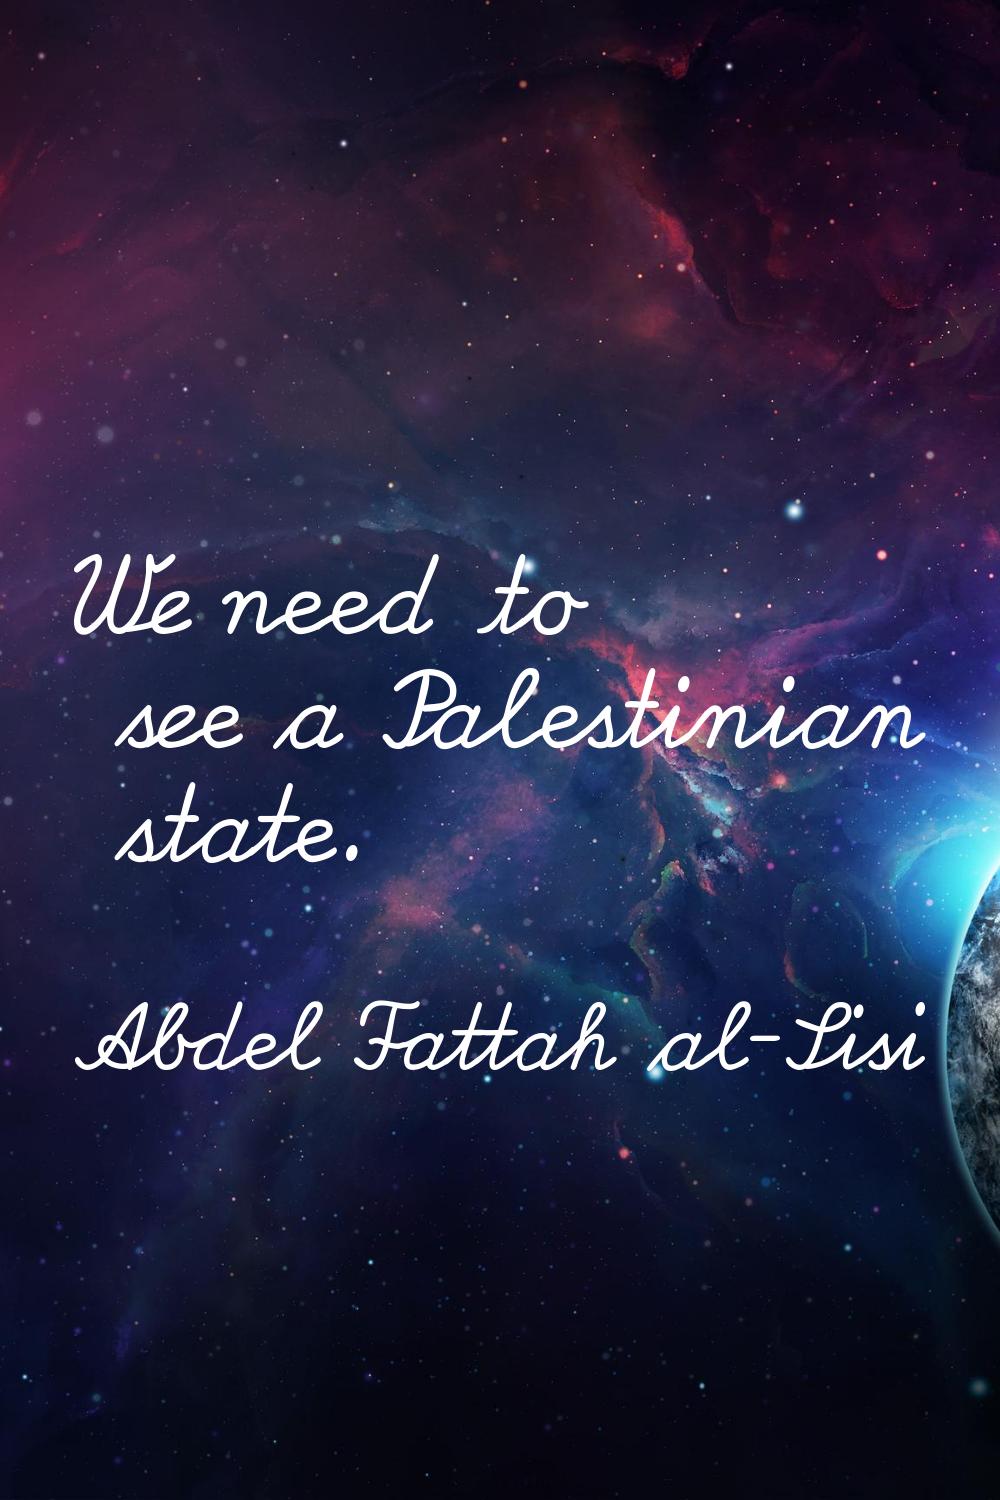 We need to see a Palestinian state.